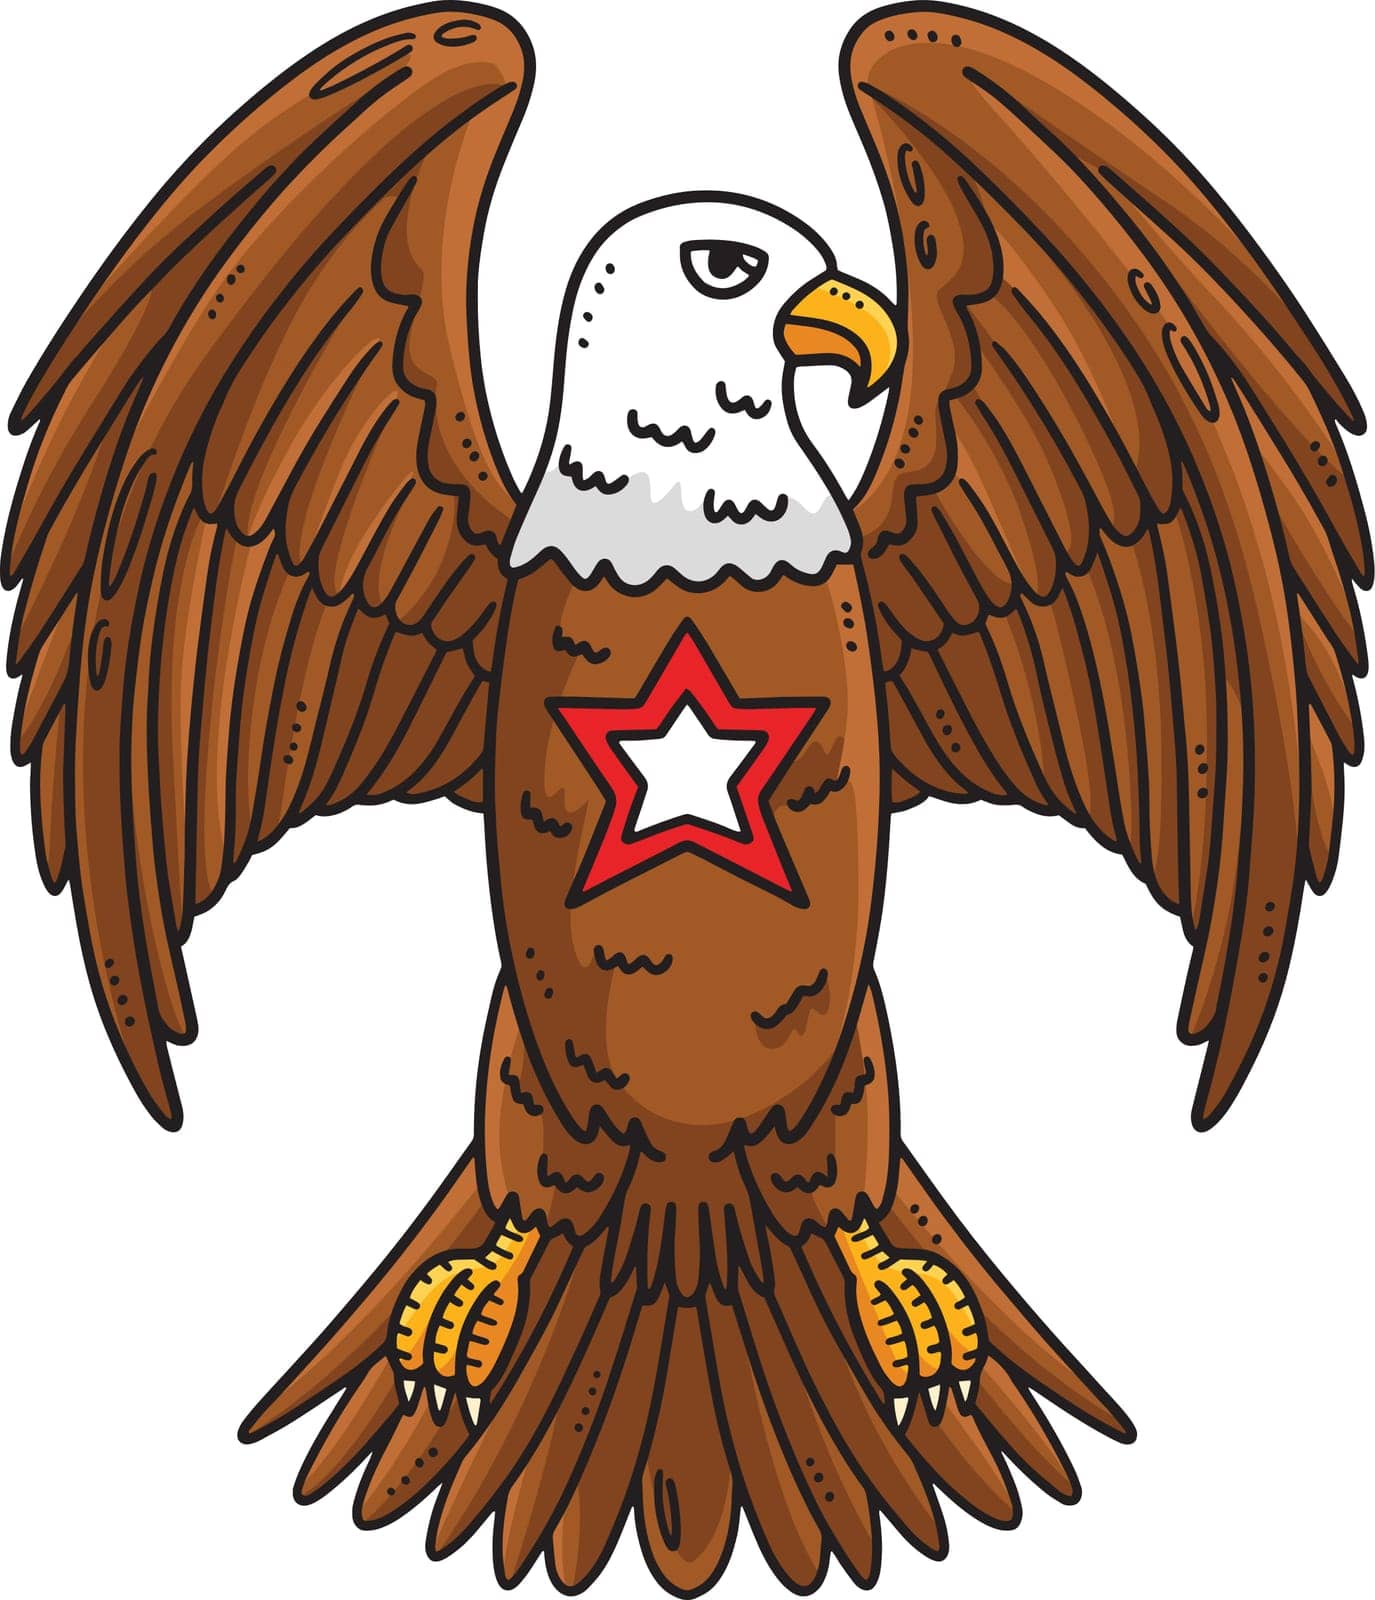 American Eagle Cartoon Colored Clipart by abbydesign